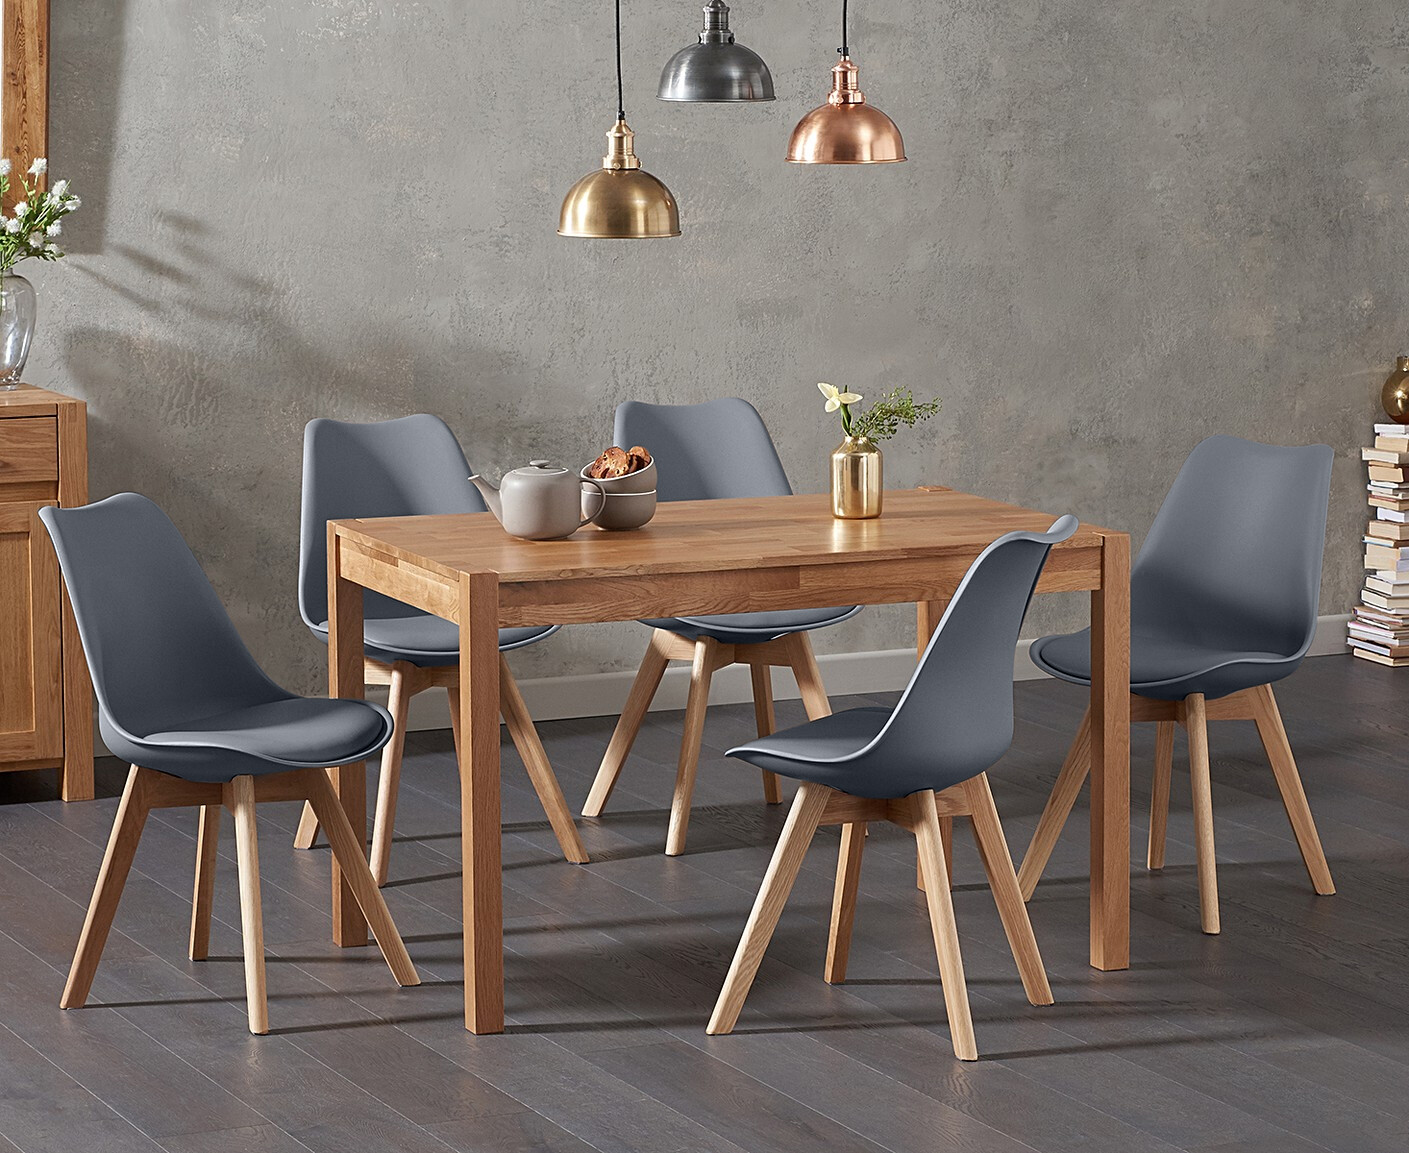 Photo 3 of York 120cm solid oak dining table with 4 dark grey orson chairs